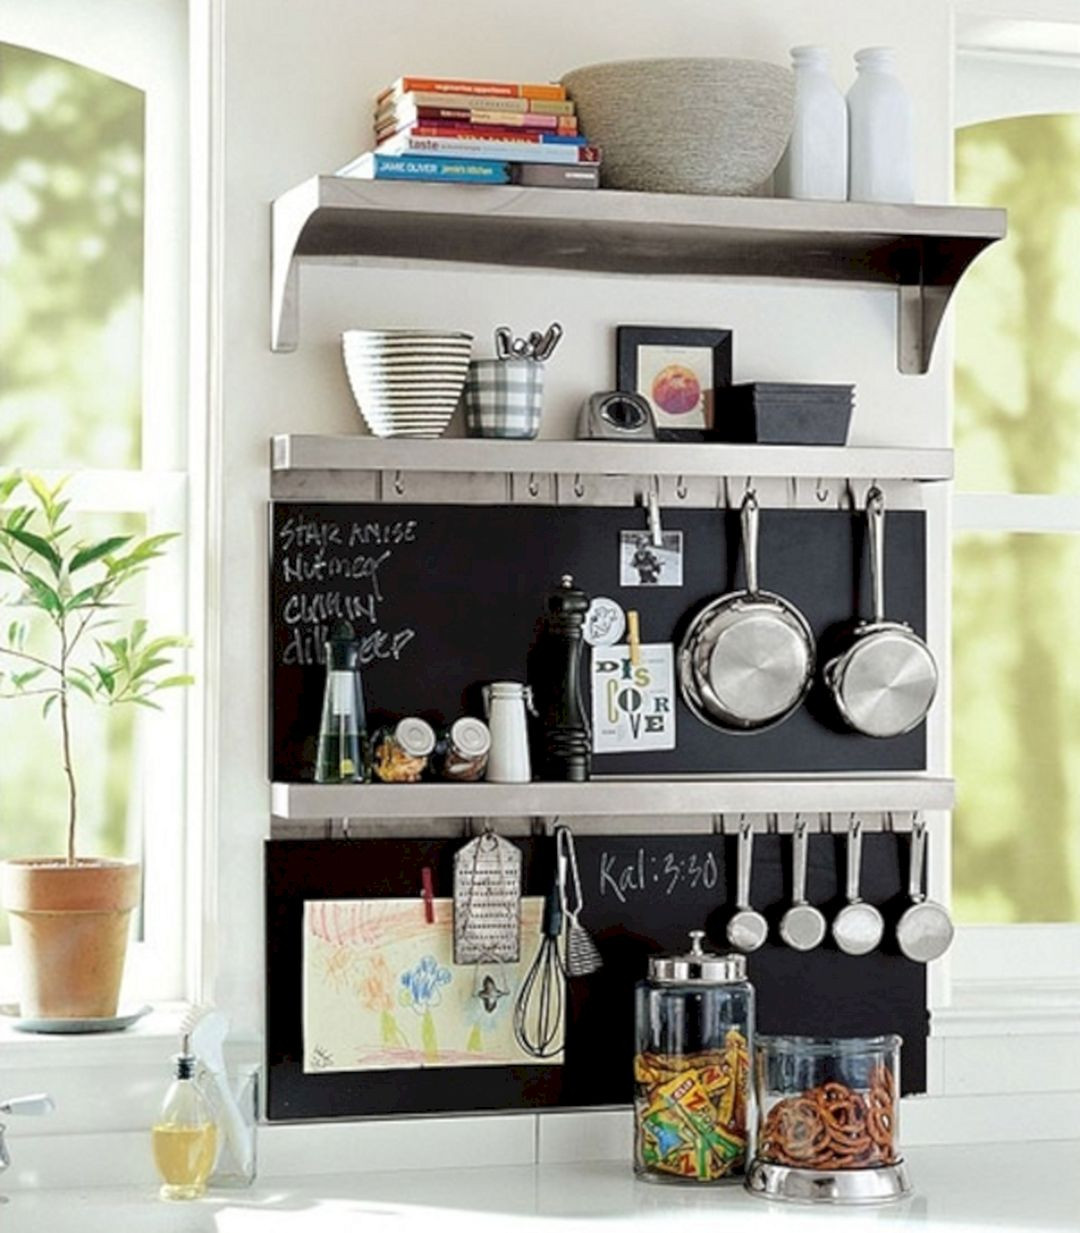 Kitchen Storage For Small Spaces
 Small Space Kitchen Storage Ideas Small Space Kitchen